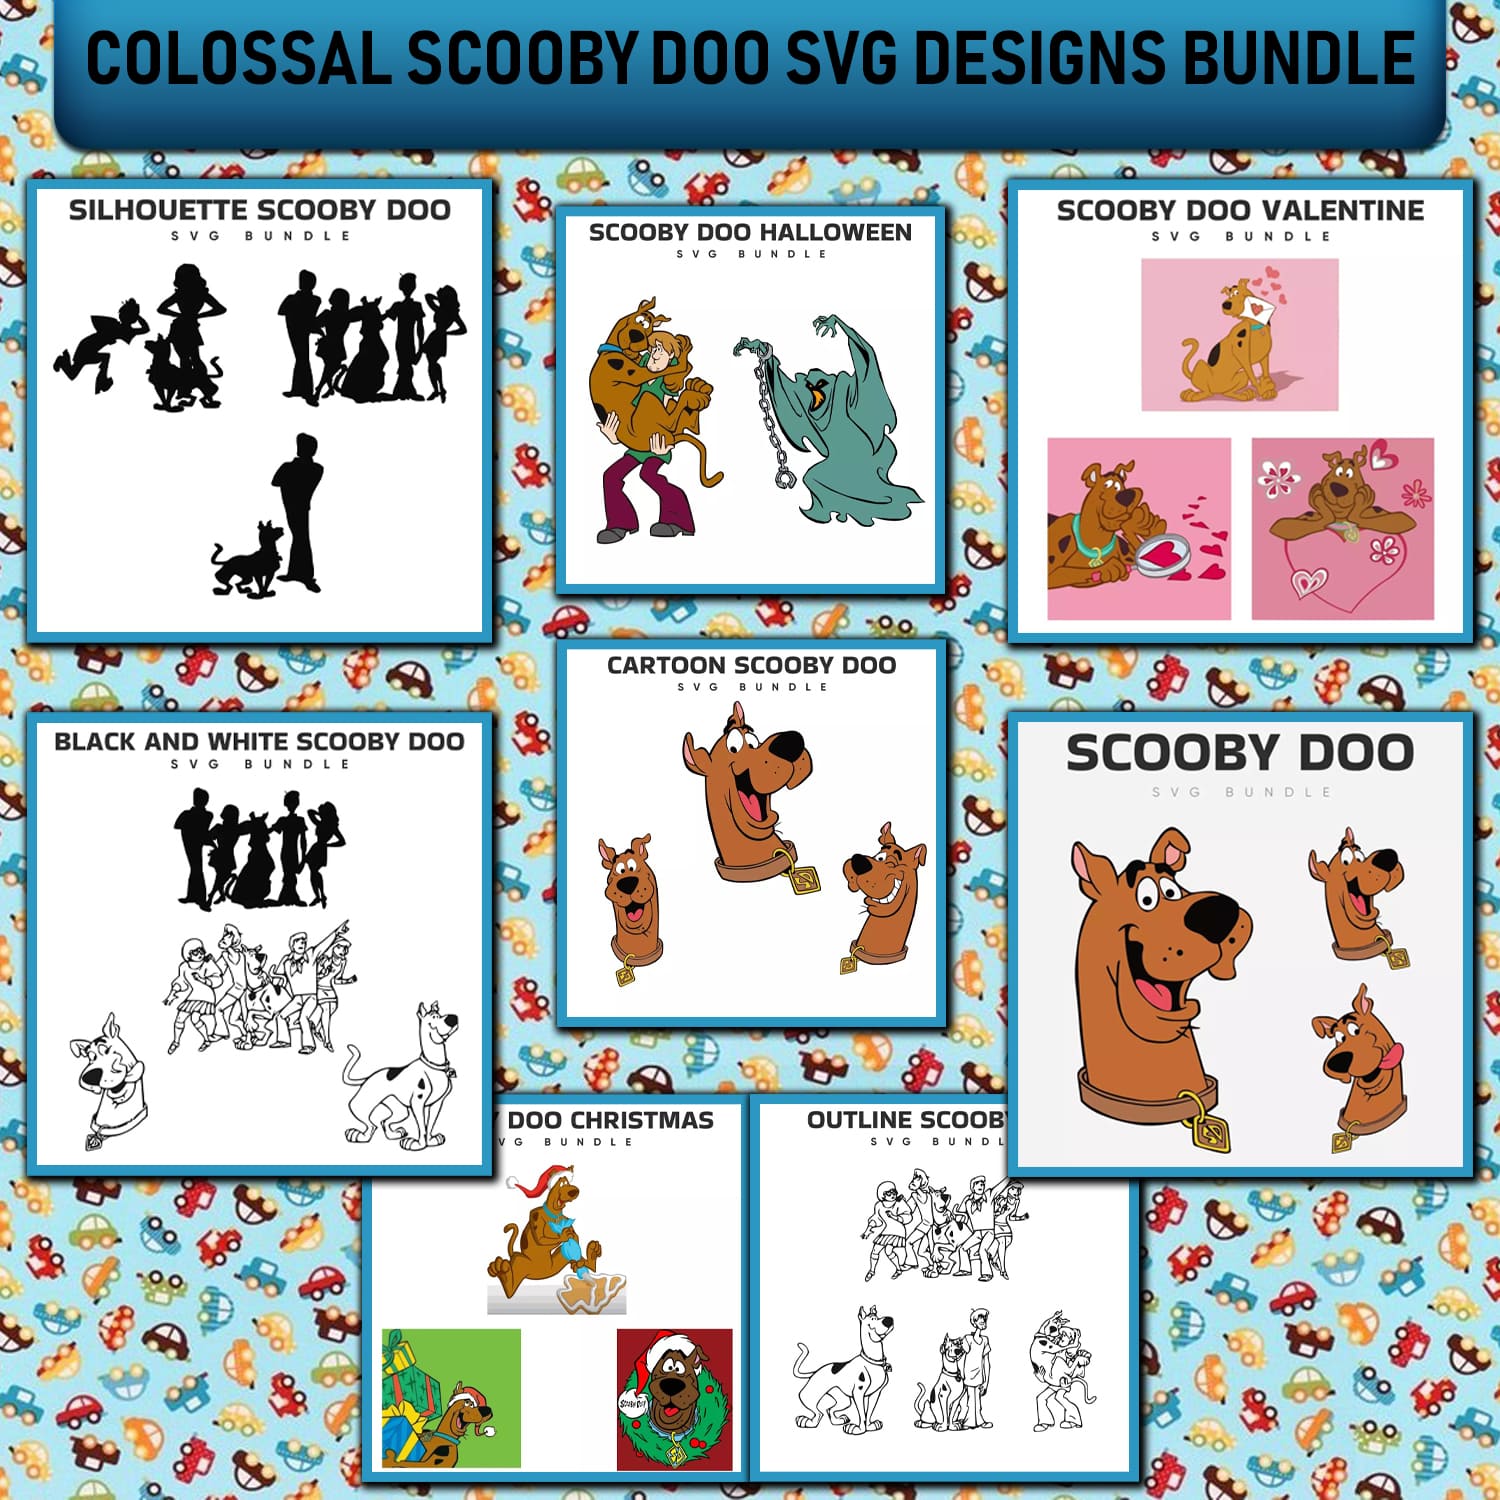 Colossal Scooby Doo SVG Designs Bundle cover image.